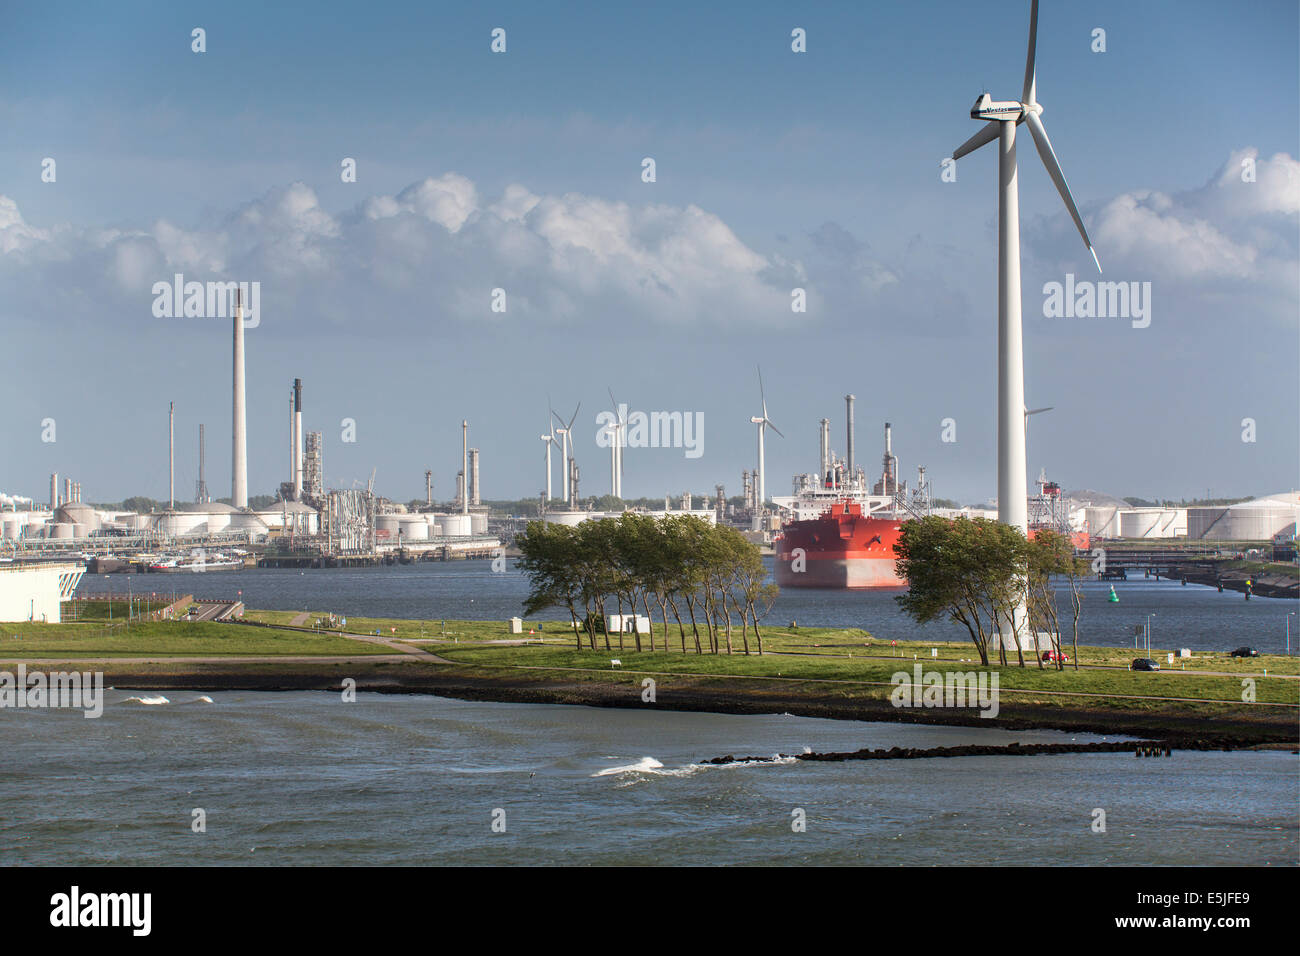 Netherlands, Rotterdam, Port of Rotterdam. Harbour or harbor. Oil storage and petro chemical industries. Wind turbines Stock Photo